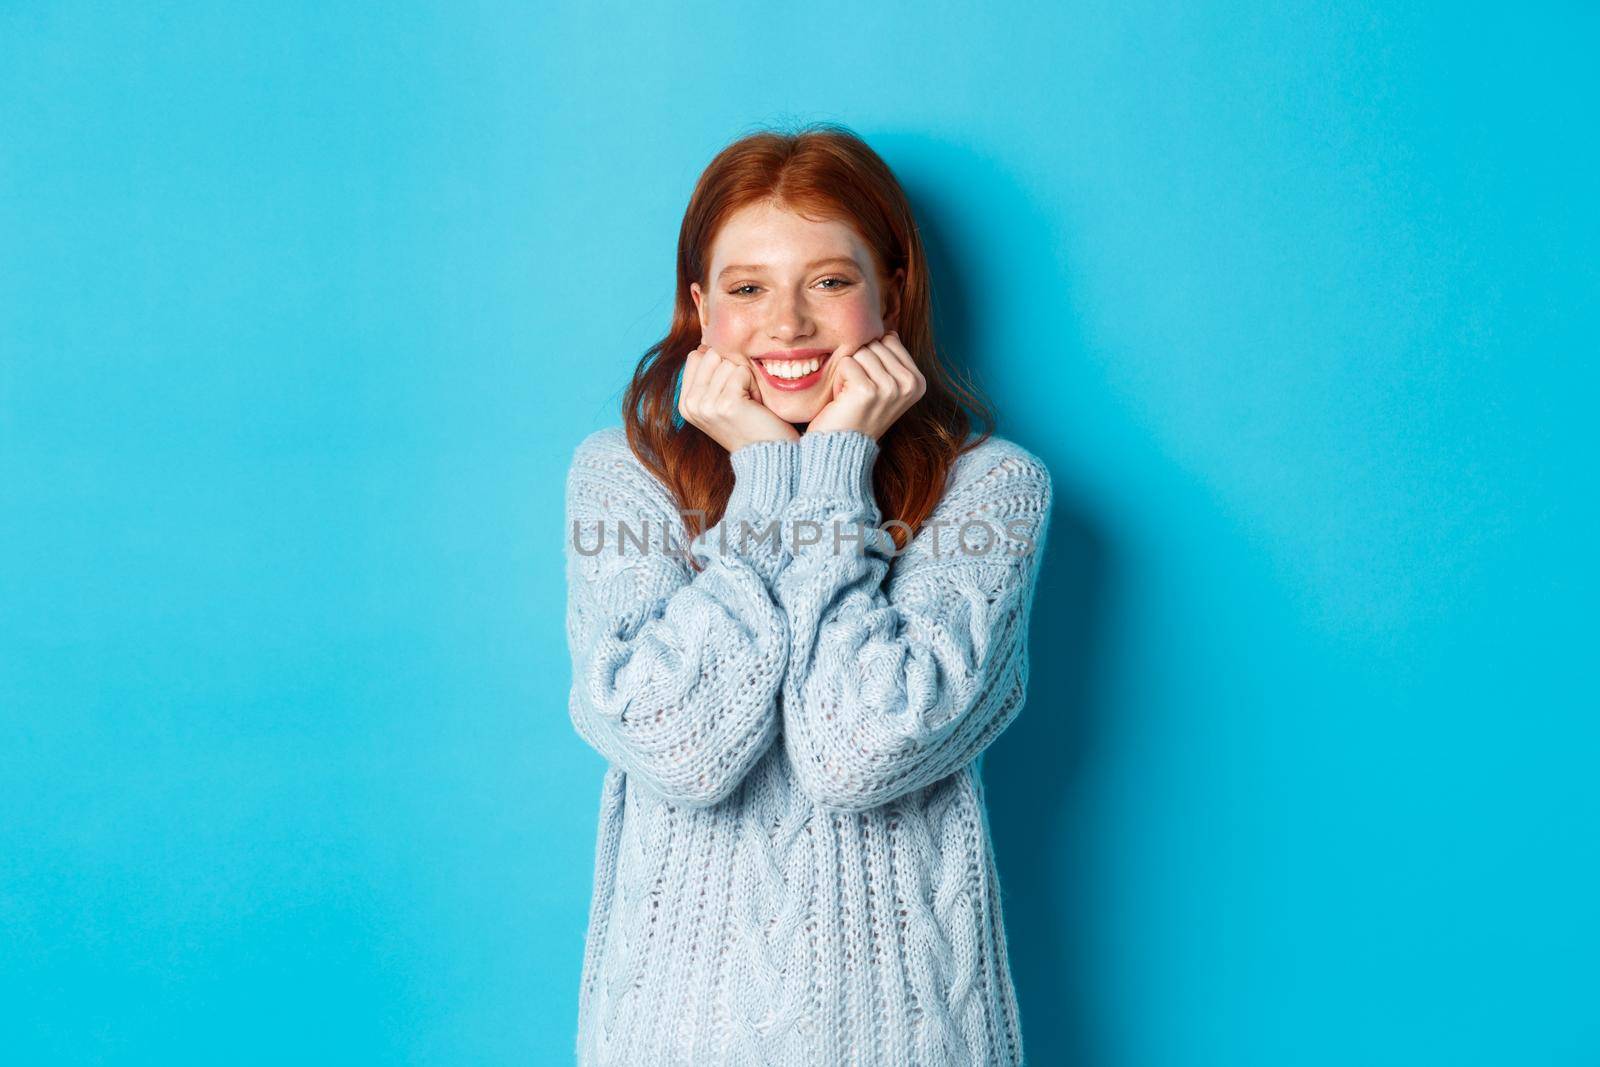 Lovely redhead teenage girl looking daydreaming, staring with admirationa sympathy at camera, standing against blue background.